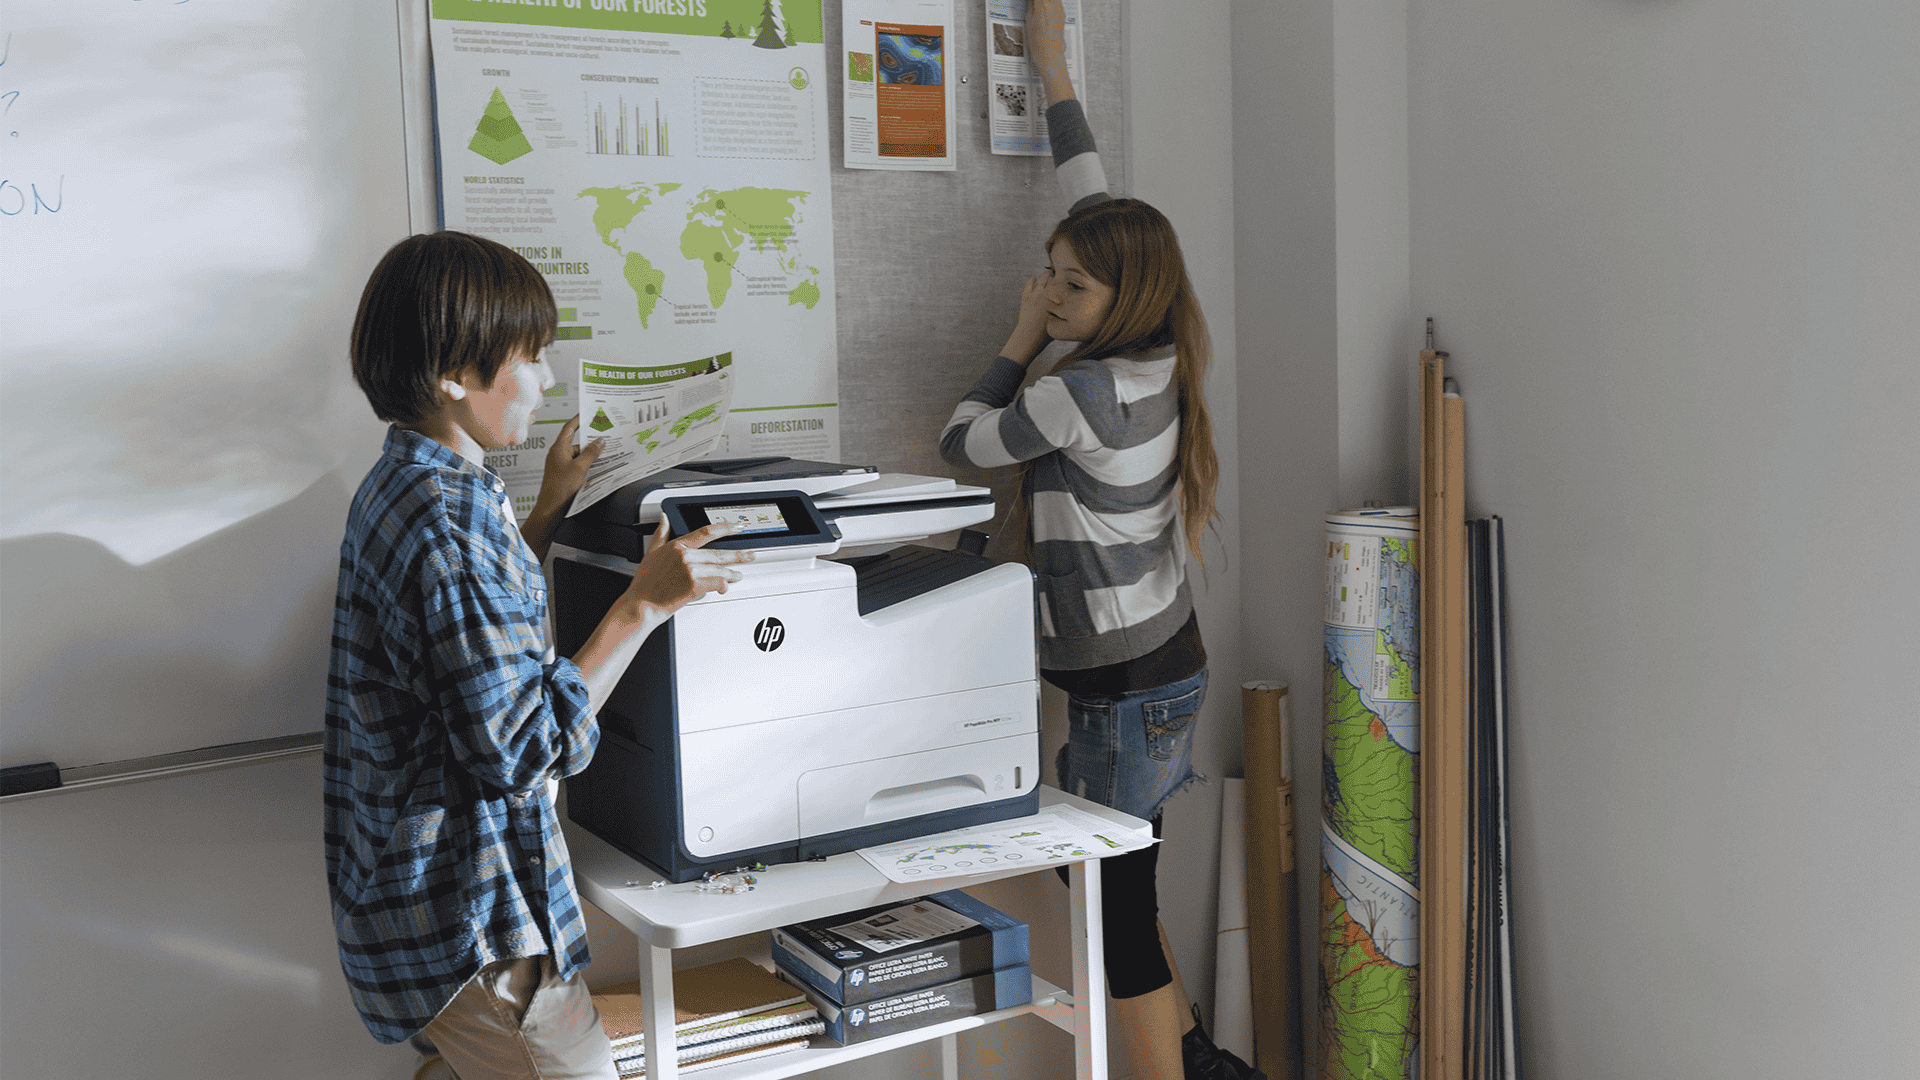 HP Printer in Lower Ed Classroom Context